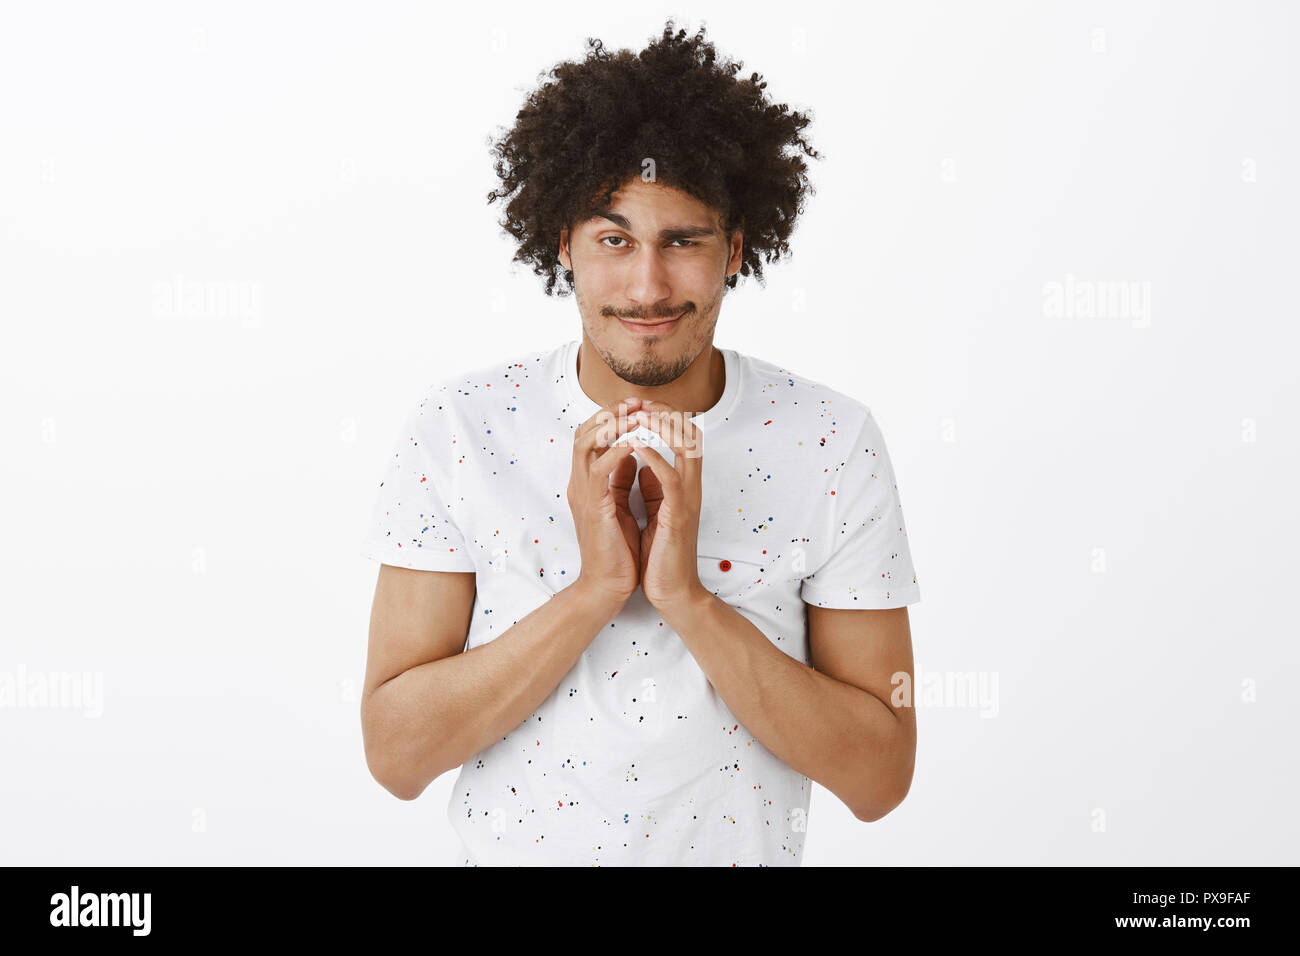 Evil genius have great plan to conquer world. Tricky and mysterious funny hispanic guy with curly hair, steeping fingers and smirking at camera, lifting one eyebrow, having bad intention in mind Stock Photo